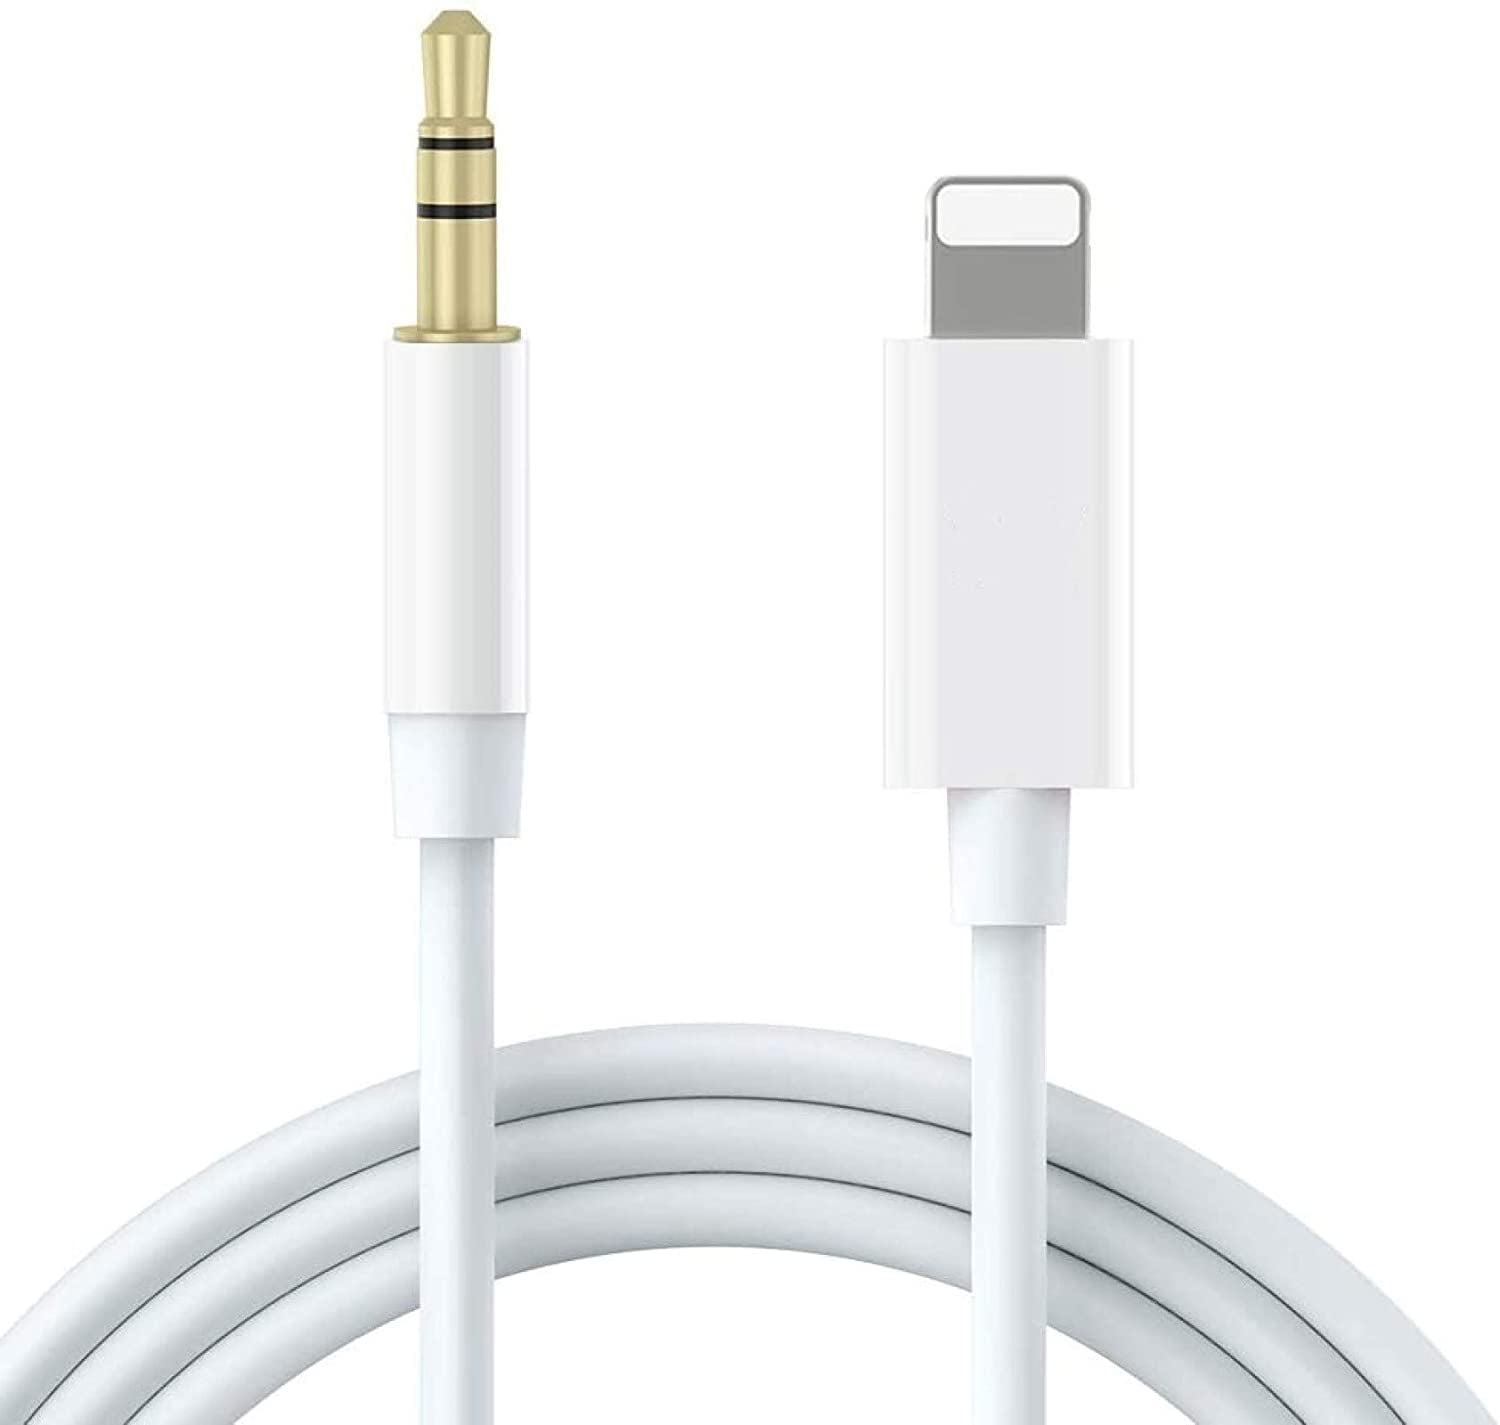 Headphone Adapter Support All iOS System Apple MFI Certified iPhone Aux to Lightning Cable, 3.3FT 3.5mm Aux Cable for iPhone 8/X/XS/11 Pro/11 Pro Max/8Plus/7/7Plus/iPad/iPod for Car Stereo,Speaker 